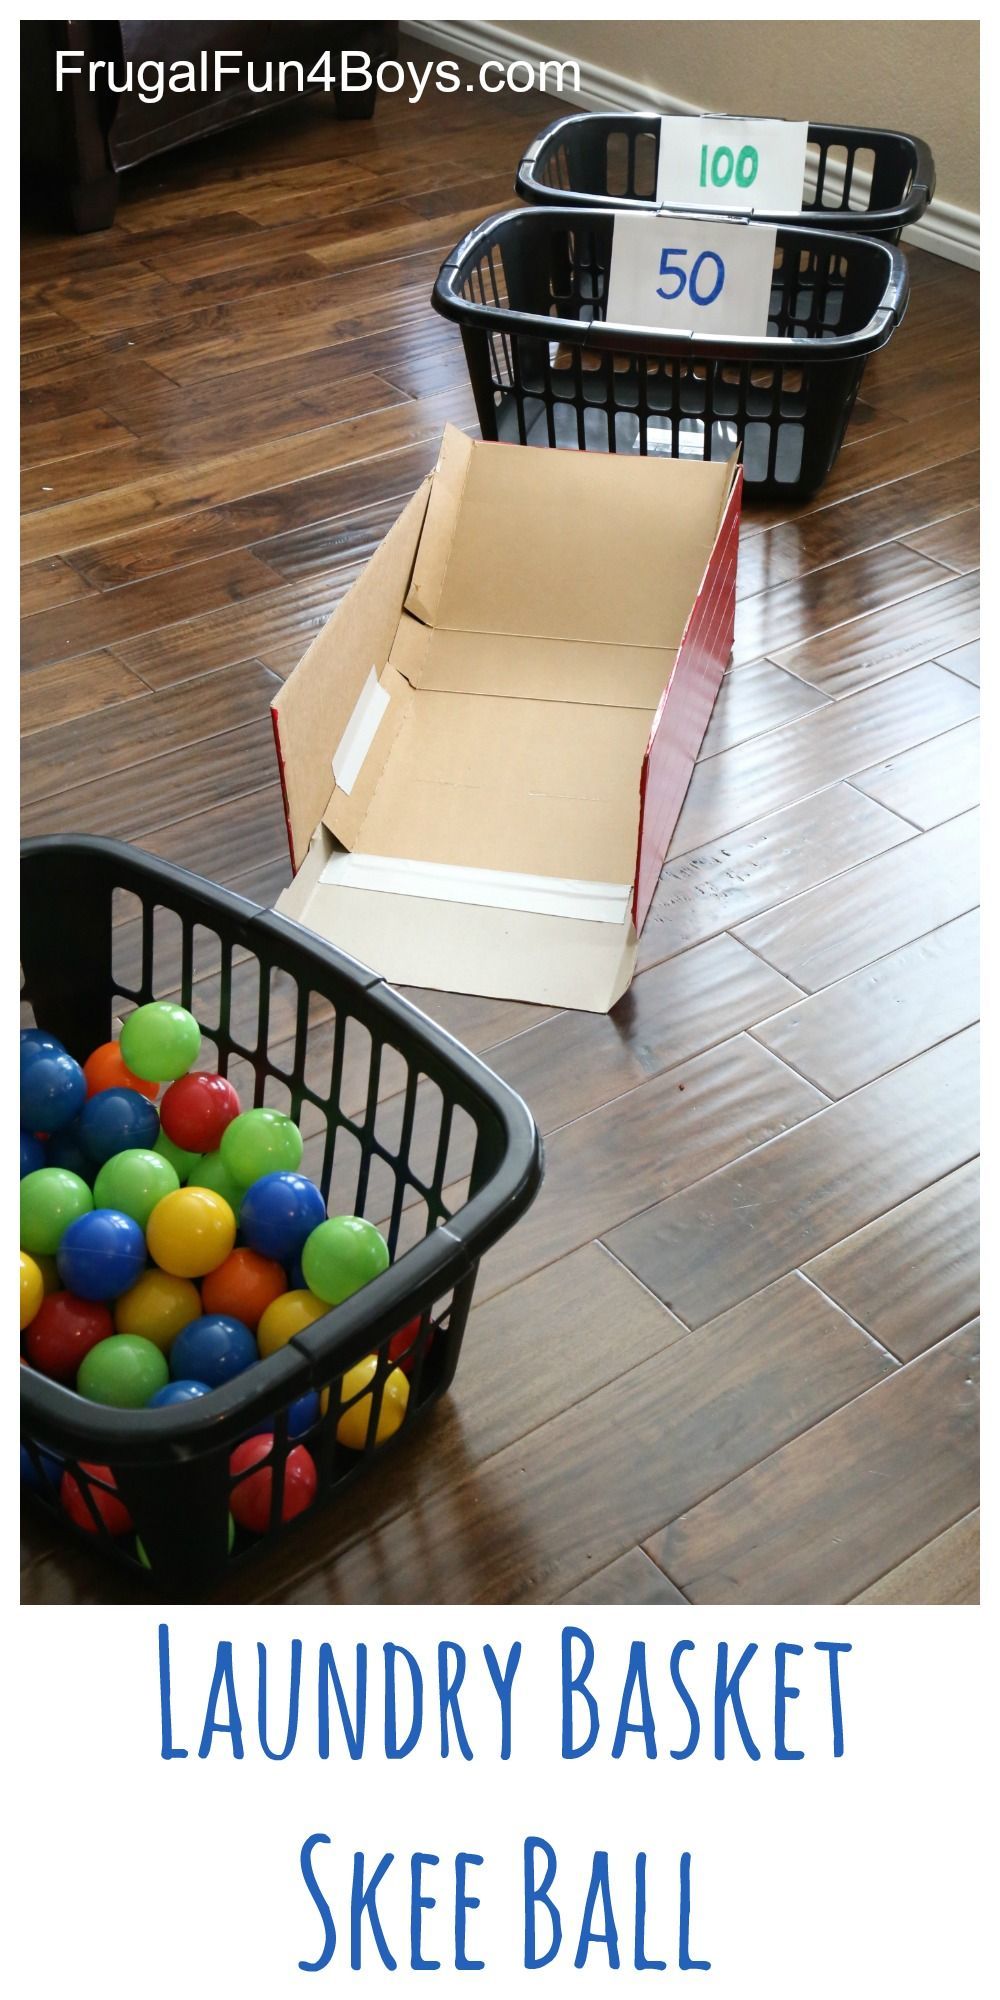 Laundry Basket Skee Ball with ball pit balls – what an awesome indoor active game